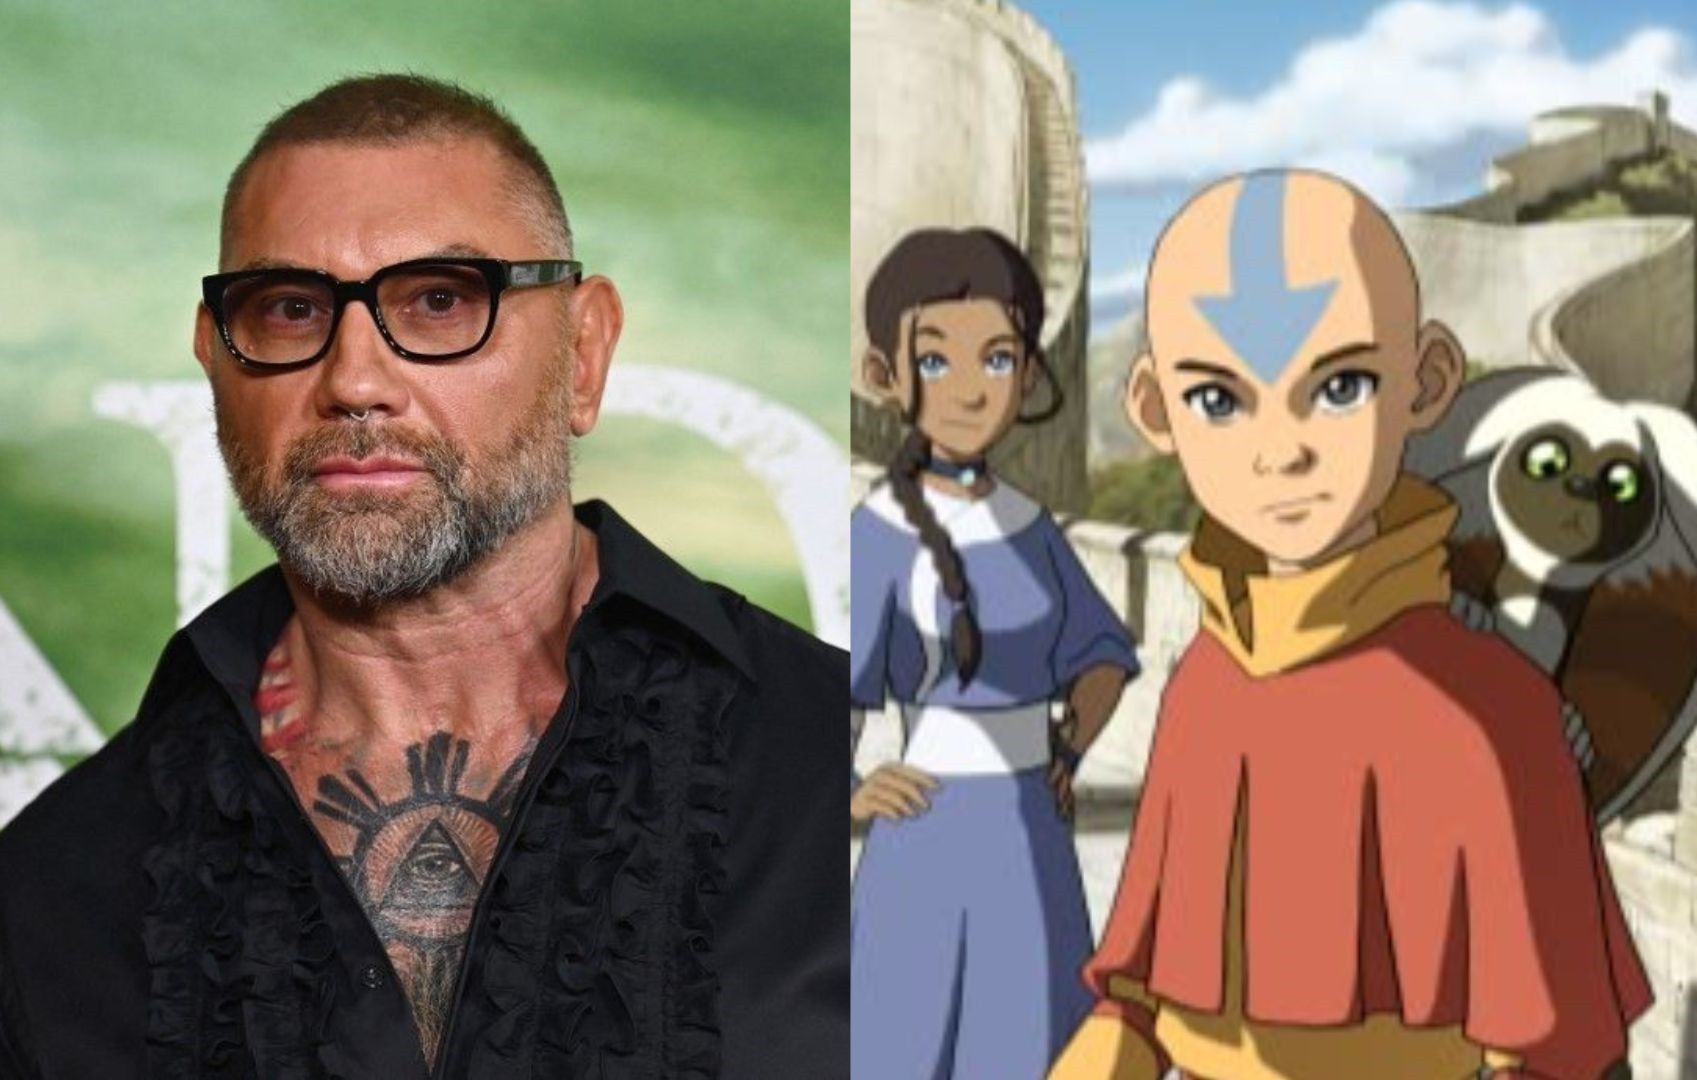 Fil-Am Dave Bautista joins cast of upcoming 'Aang: The Last Airbender' movie